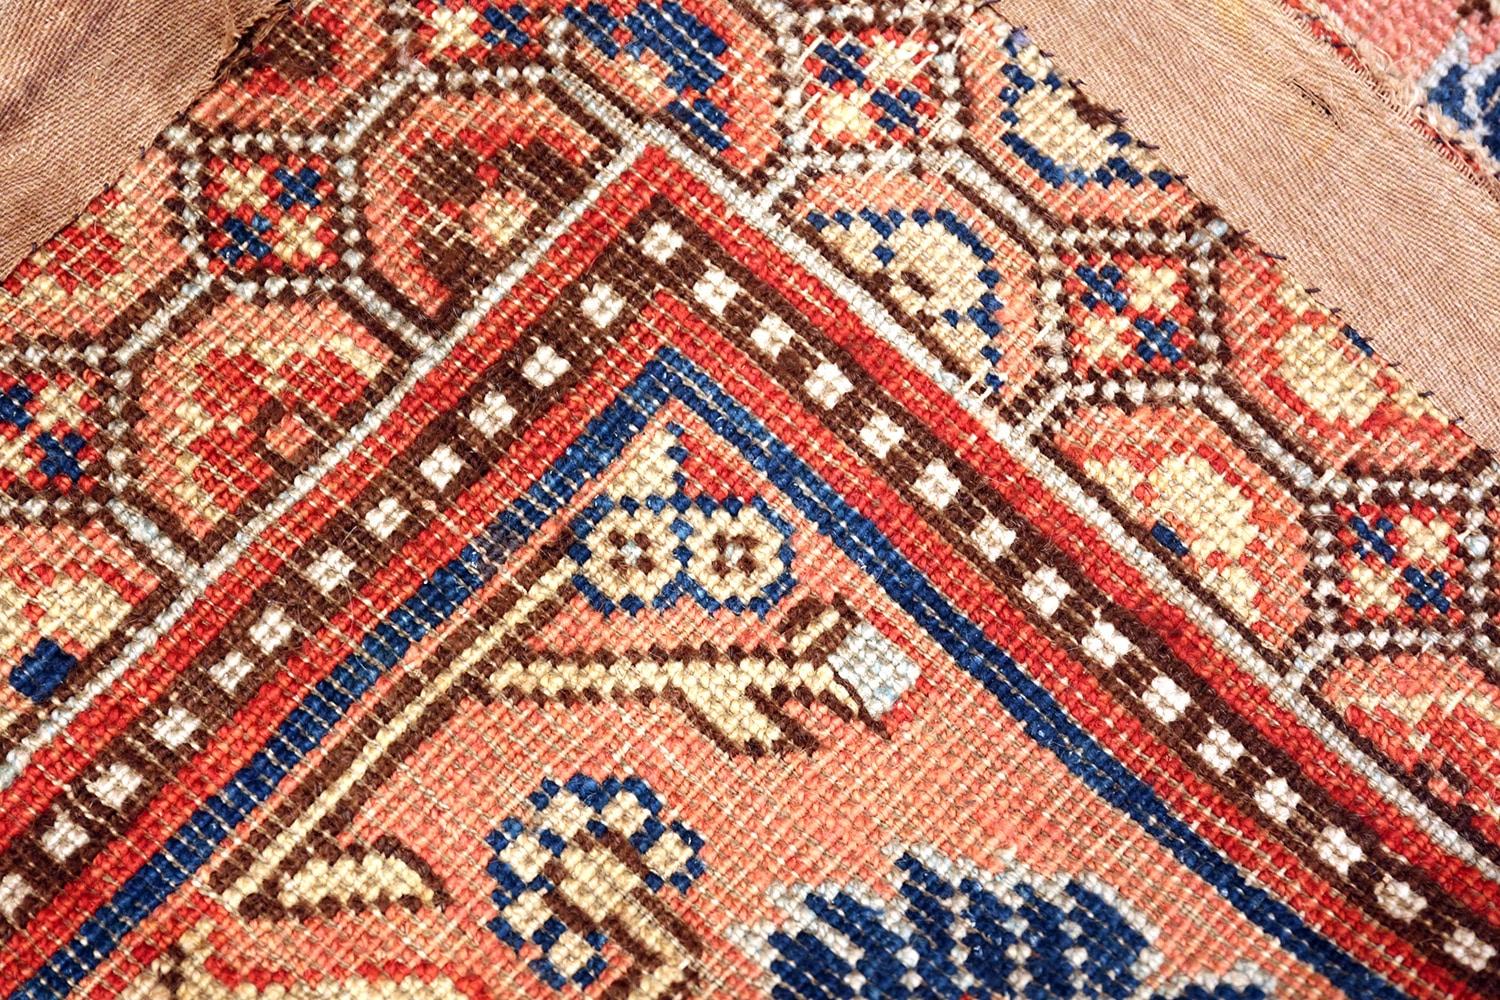 A beautiful, rare and collectible 1800's Khotan Saf prayer rug from East Turkestan prayer rug, country of origin / rug type: East Turkestan rugs, date: circa 19th century. Size: 8 ft 5 in x 3 ft 9 in (2.57 m x 1.14 m). This magnificent Khotan Saf